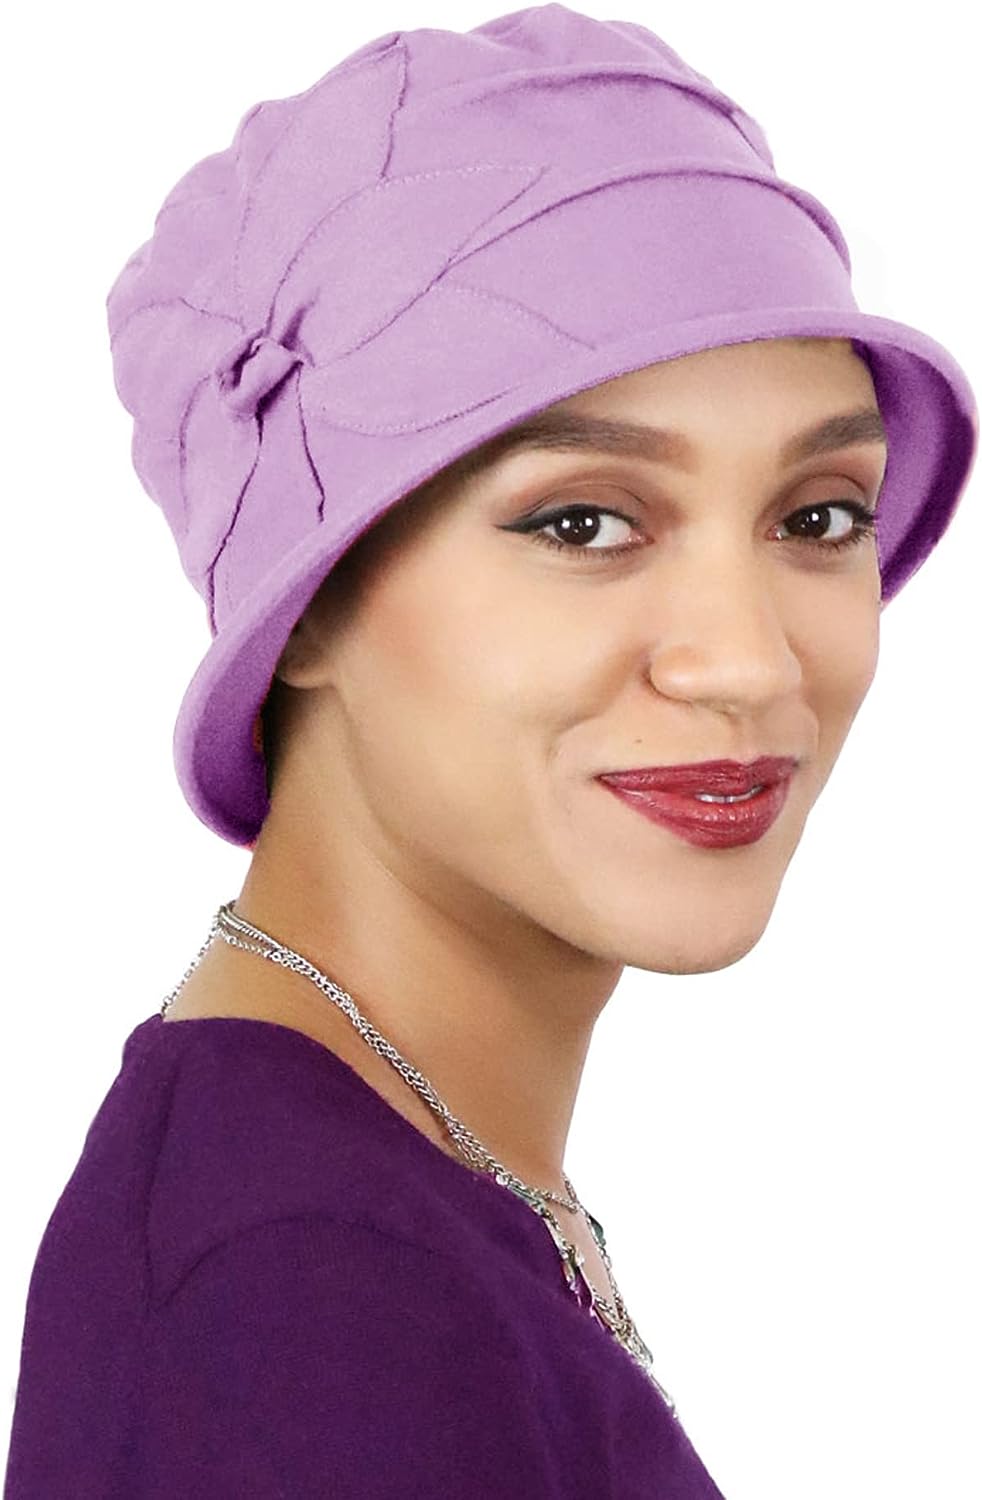 Hats Scarves & More Womens Hat Chemo Headwear Cancer Hat 50+ UPF